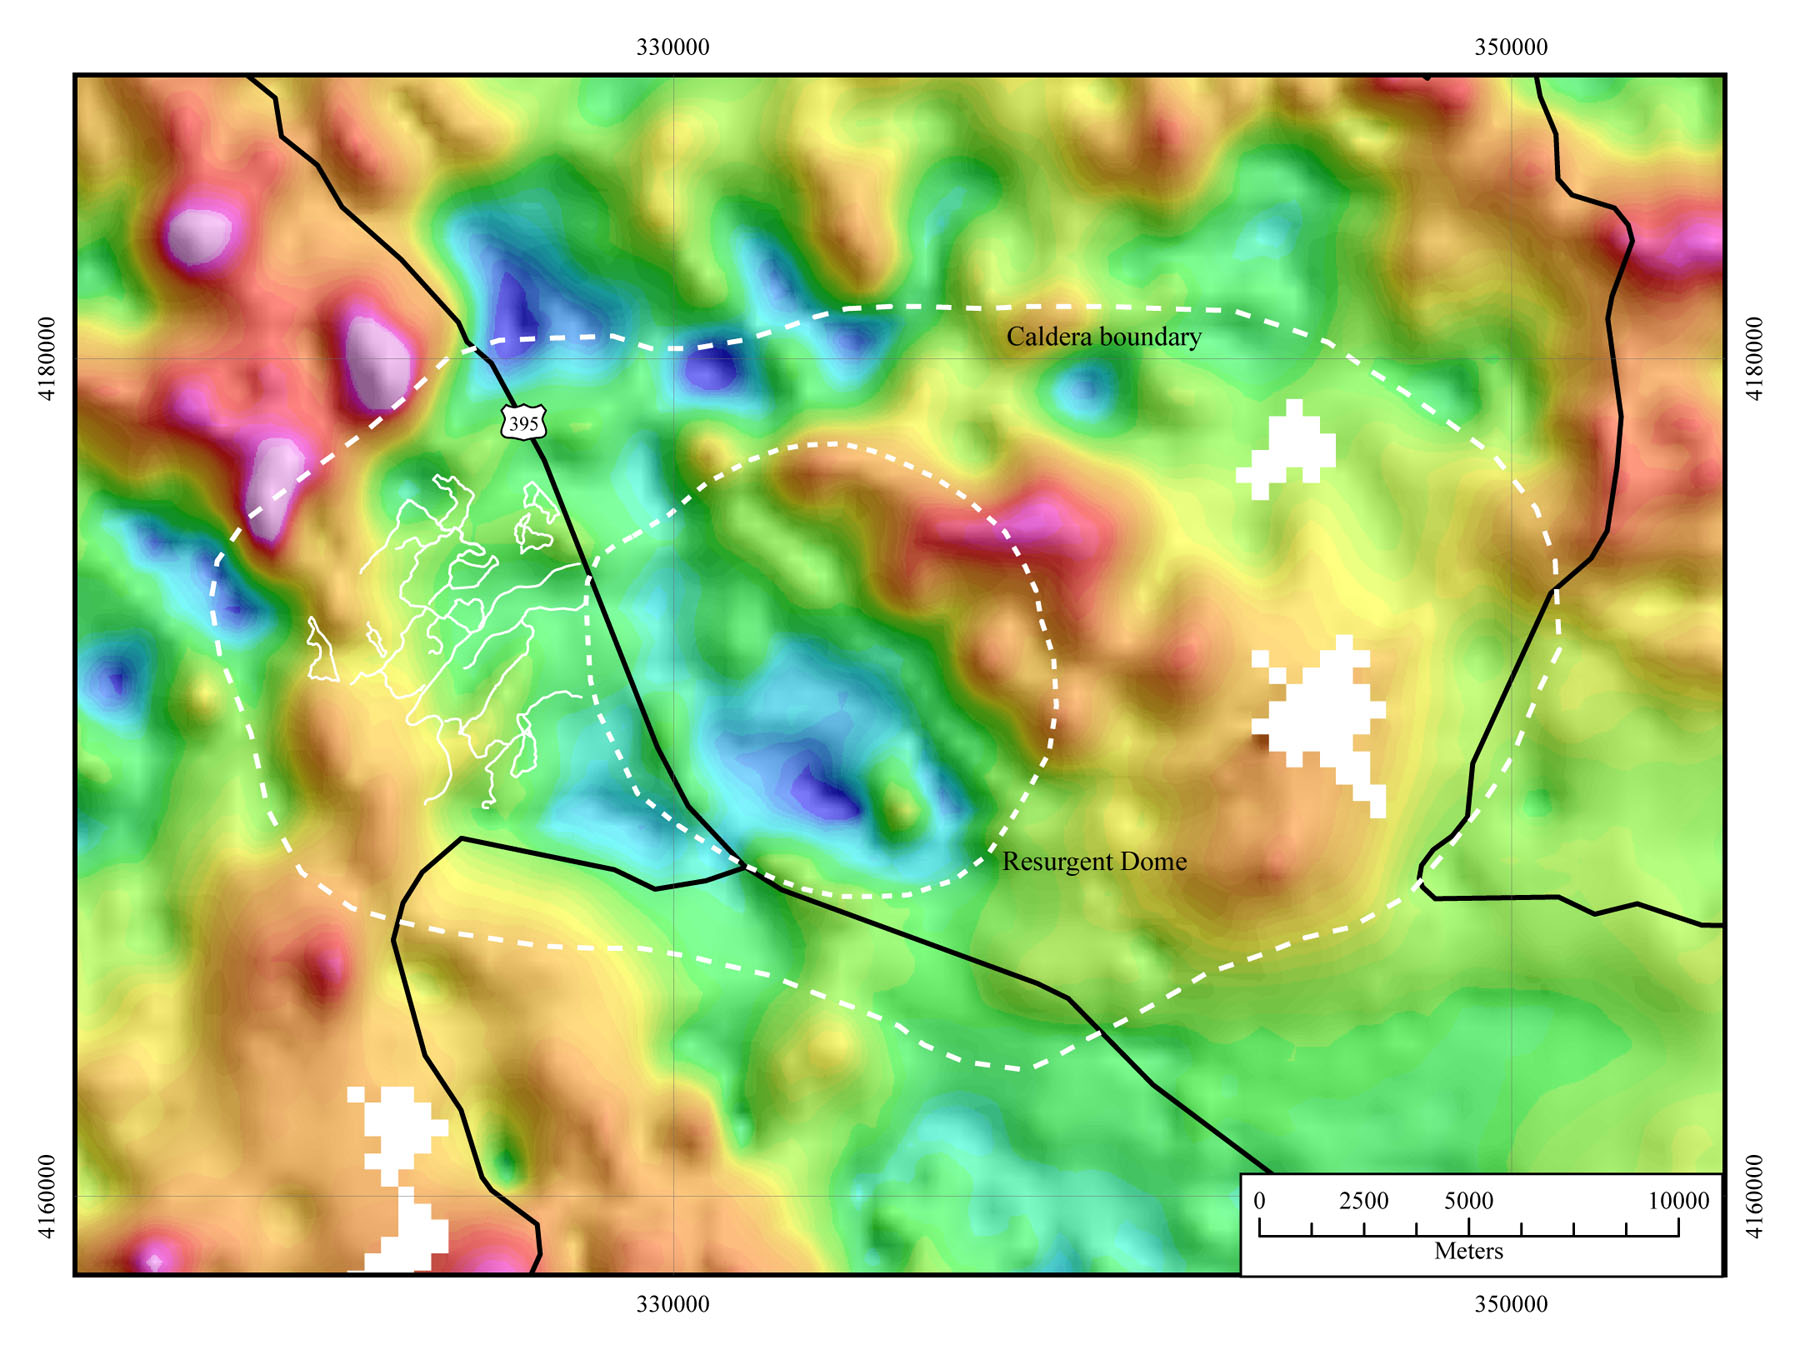 Figure 3 - merged existing aeromagnetic data of the Long Valley Caldera